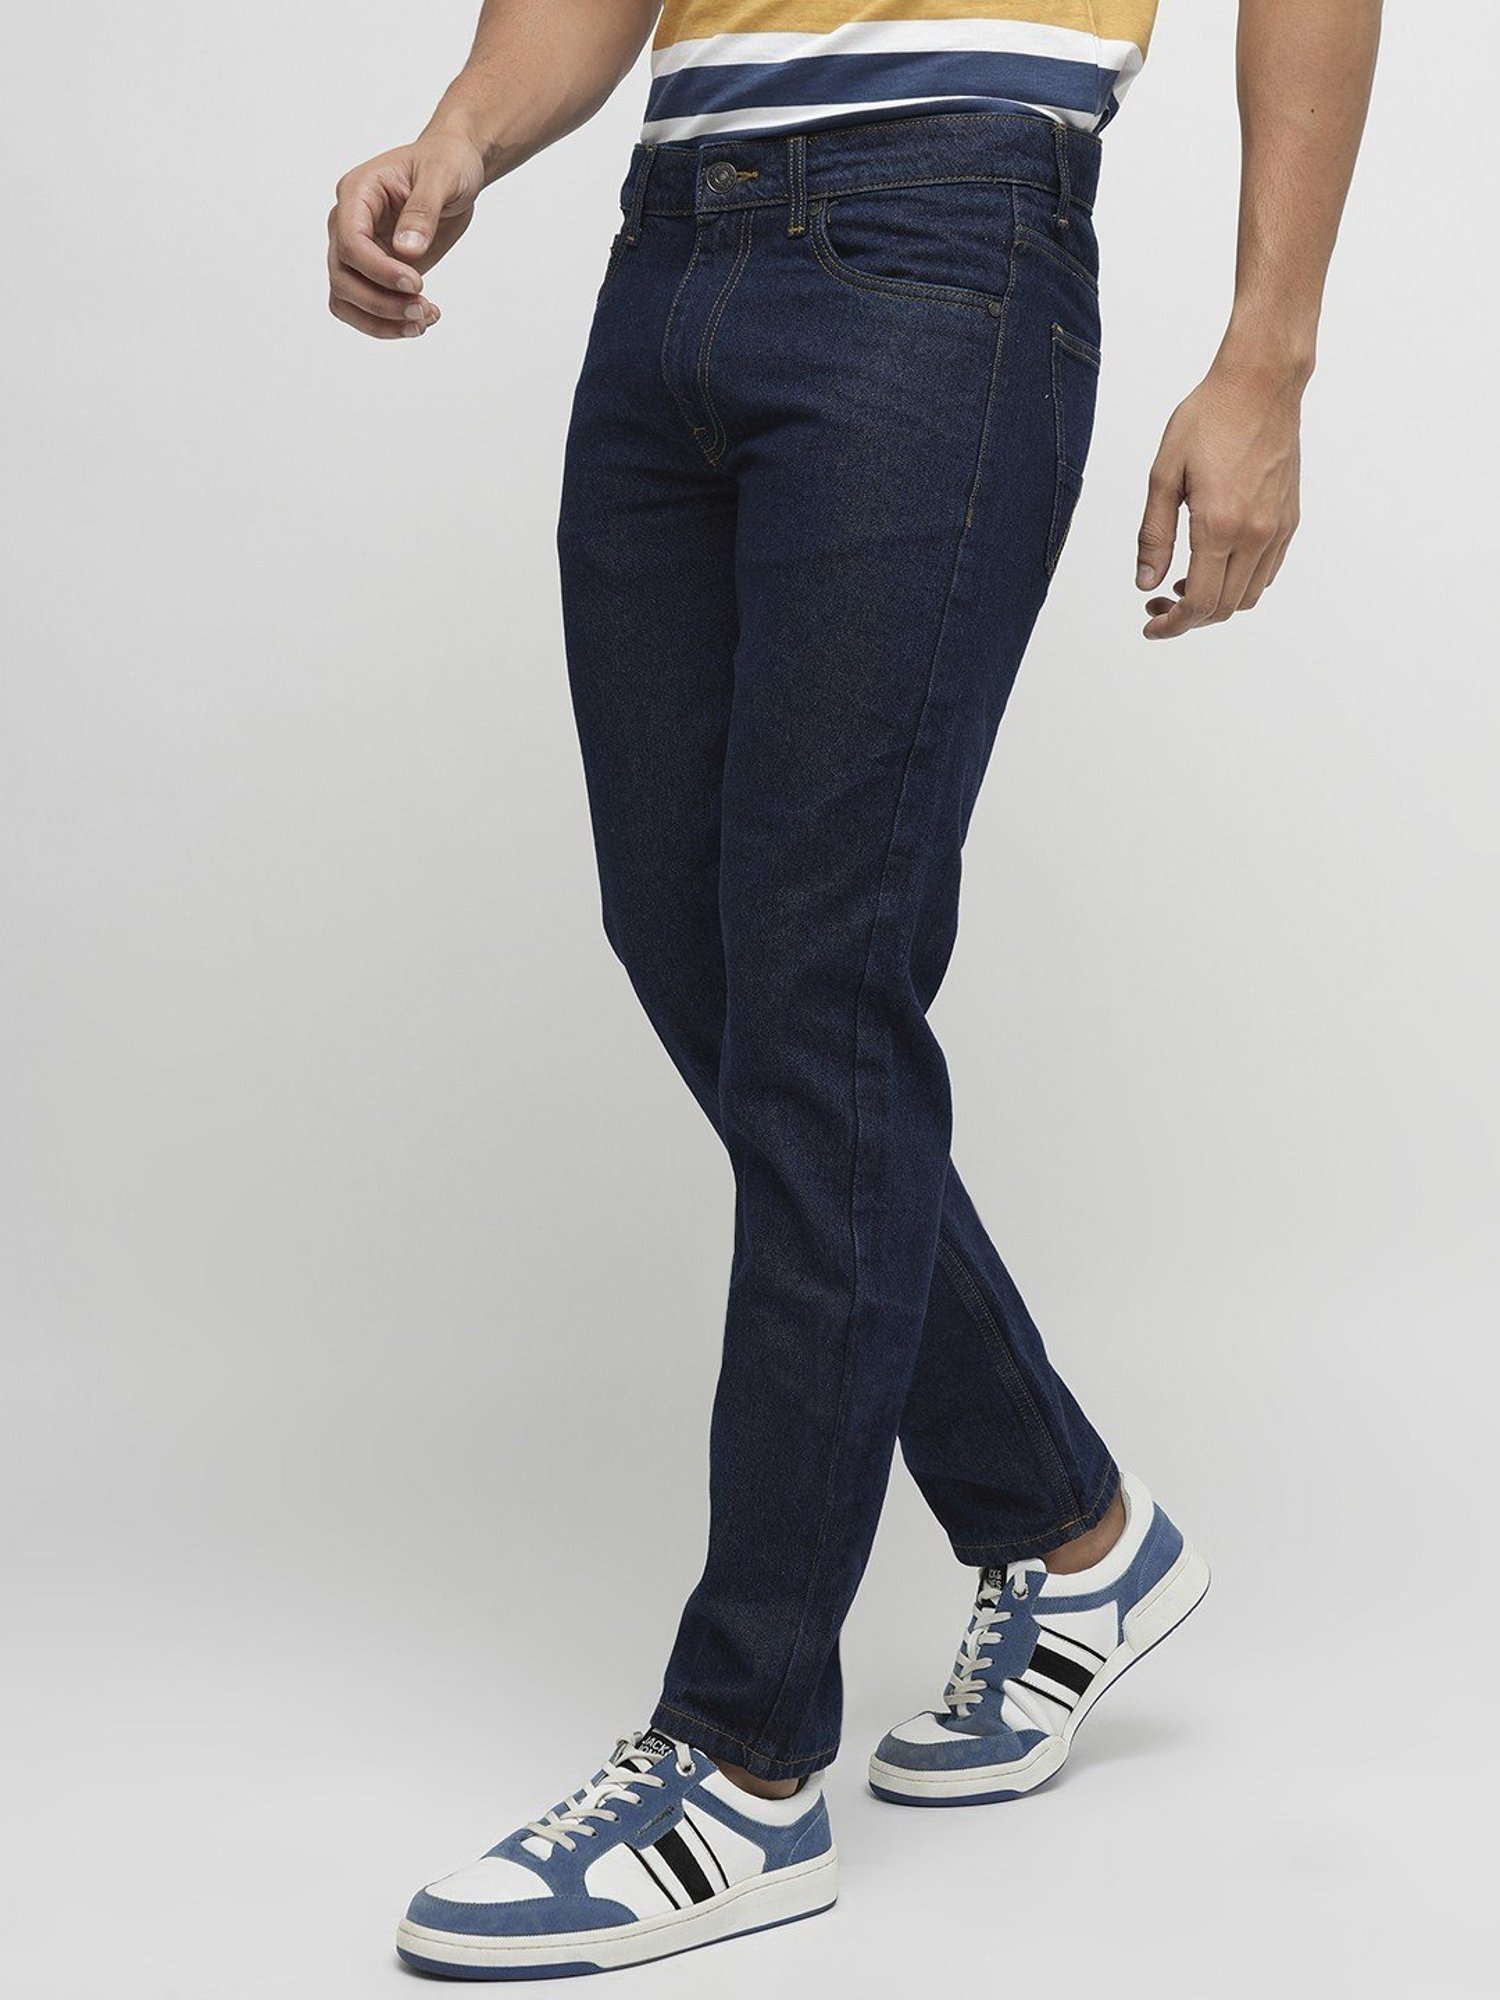 Jeans & Trousers | Imported Denim Jeans | Freeup